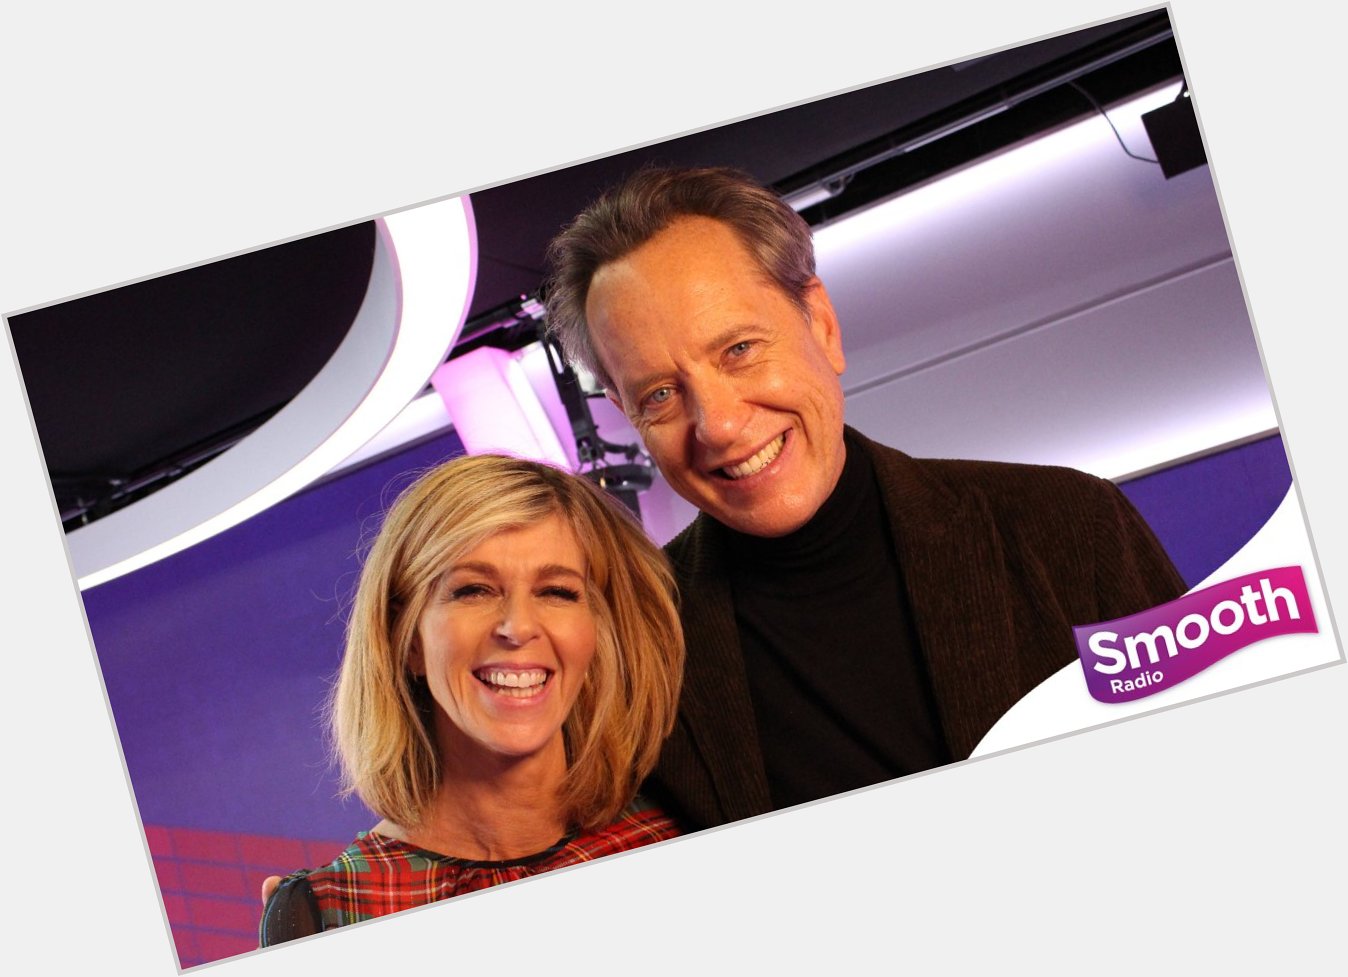 Happy 64th birthday, Here he is in the Smooth studio with Kate Garraway in 2019. 